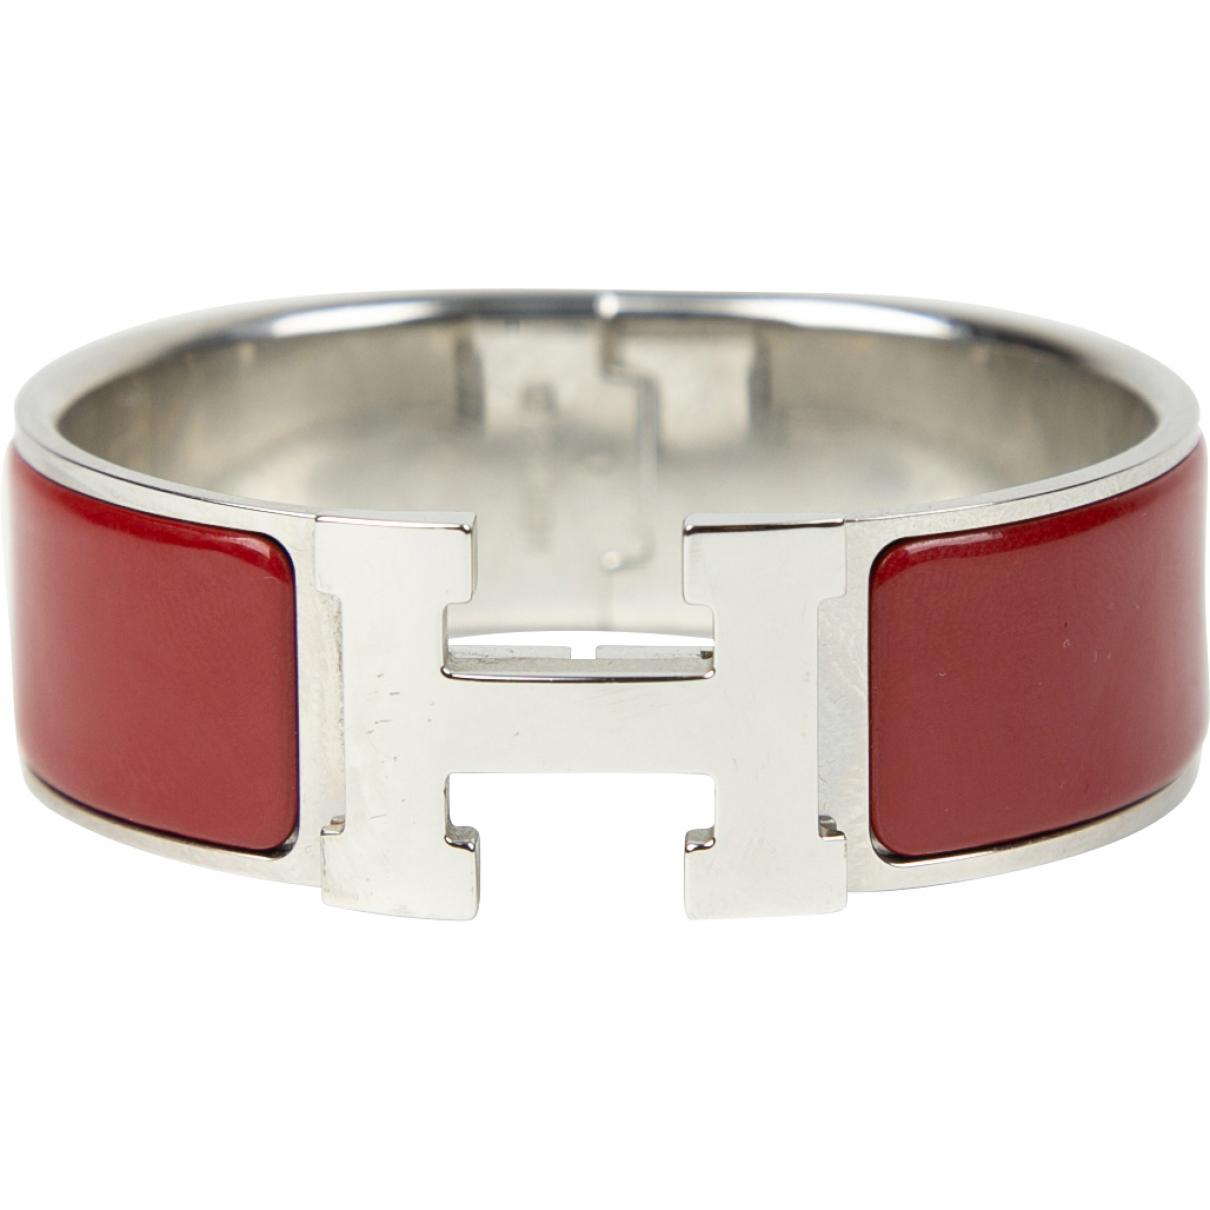 Hermès &quot;clic Clac Pm&quot; Palladium Plated Enamel Bracelet in Red/Silver (Red) - Lyst